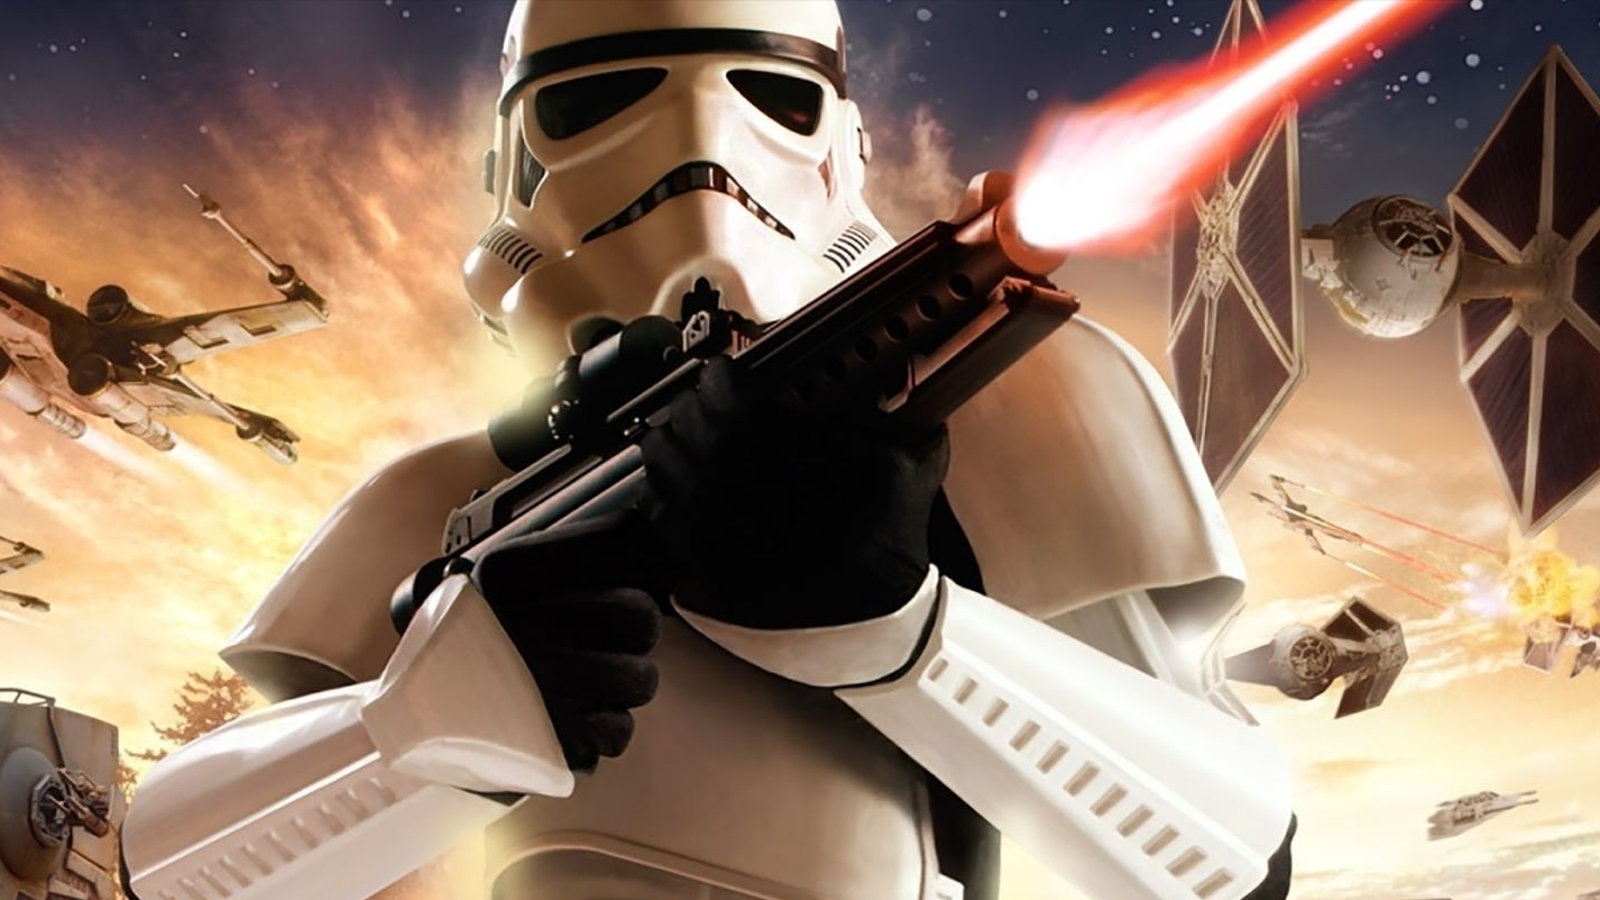 The Original Star Wars: Battlefront II Gets a New Update 12 Years Later